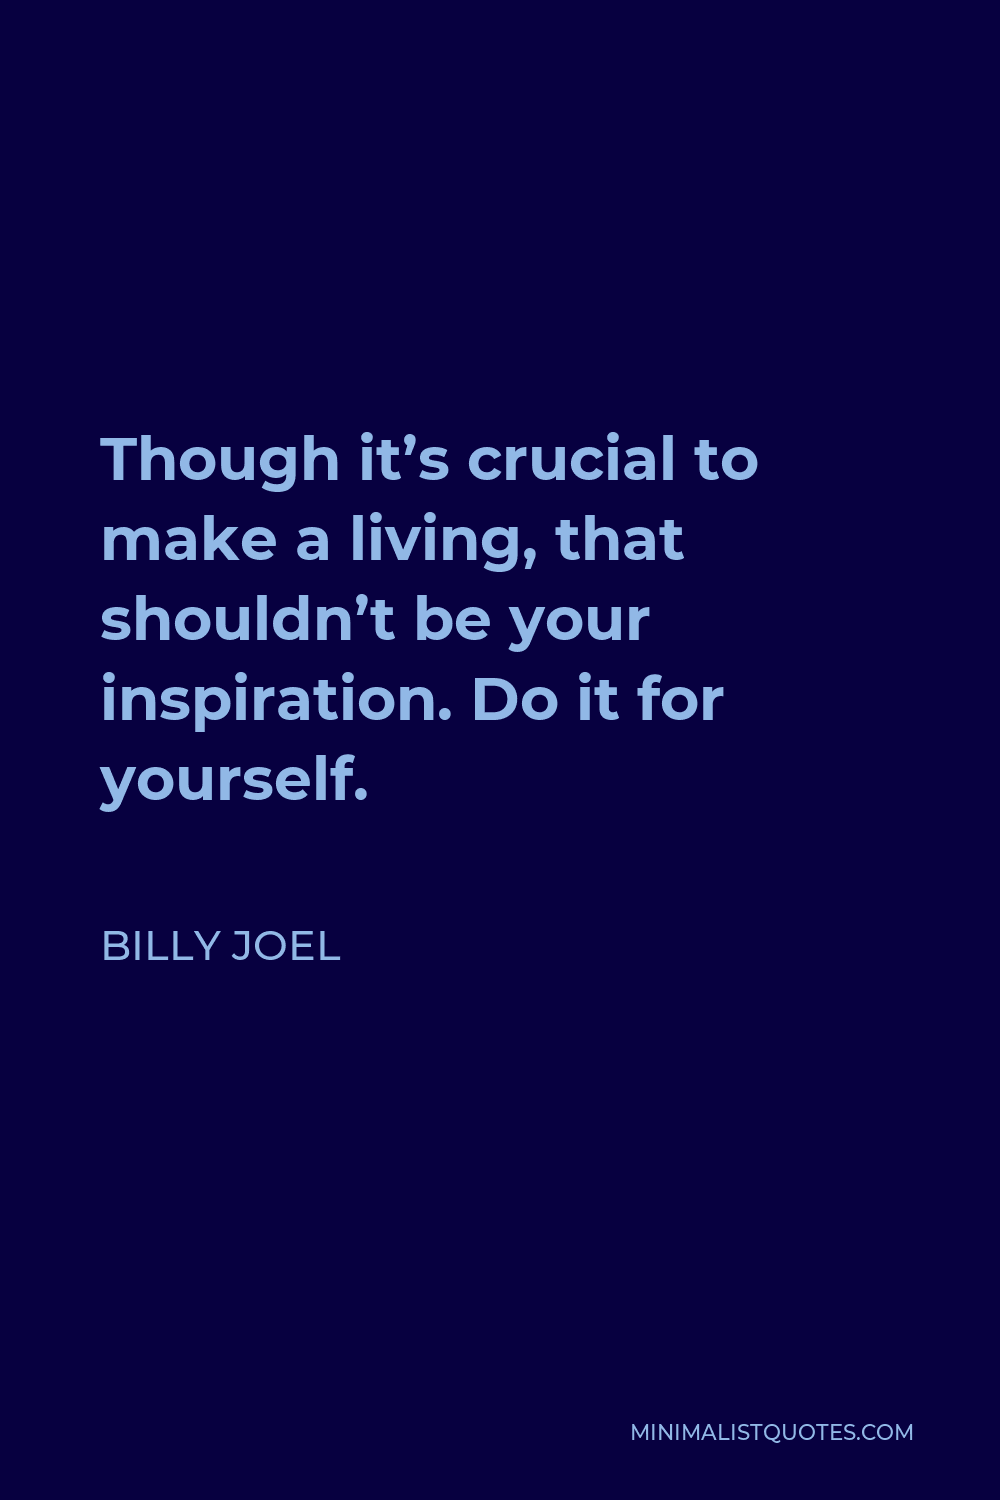 Billy Joel Quote - Though it’s crucial to make a living, that shouldn’t be your inspiration. Do it for yourself.